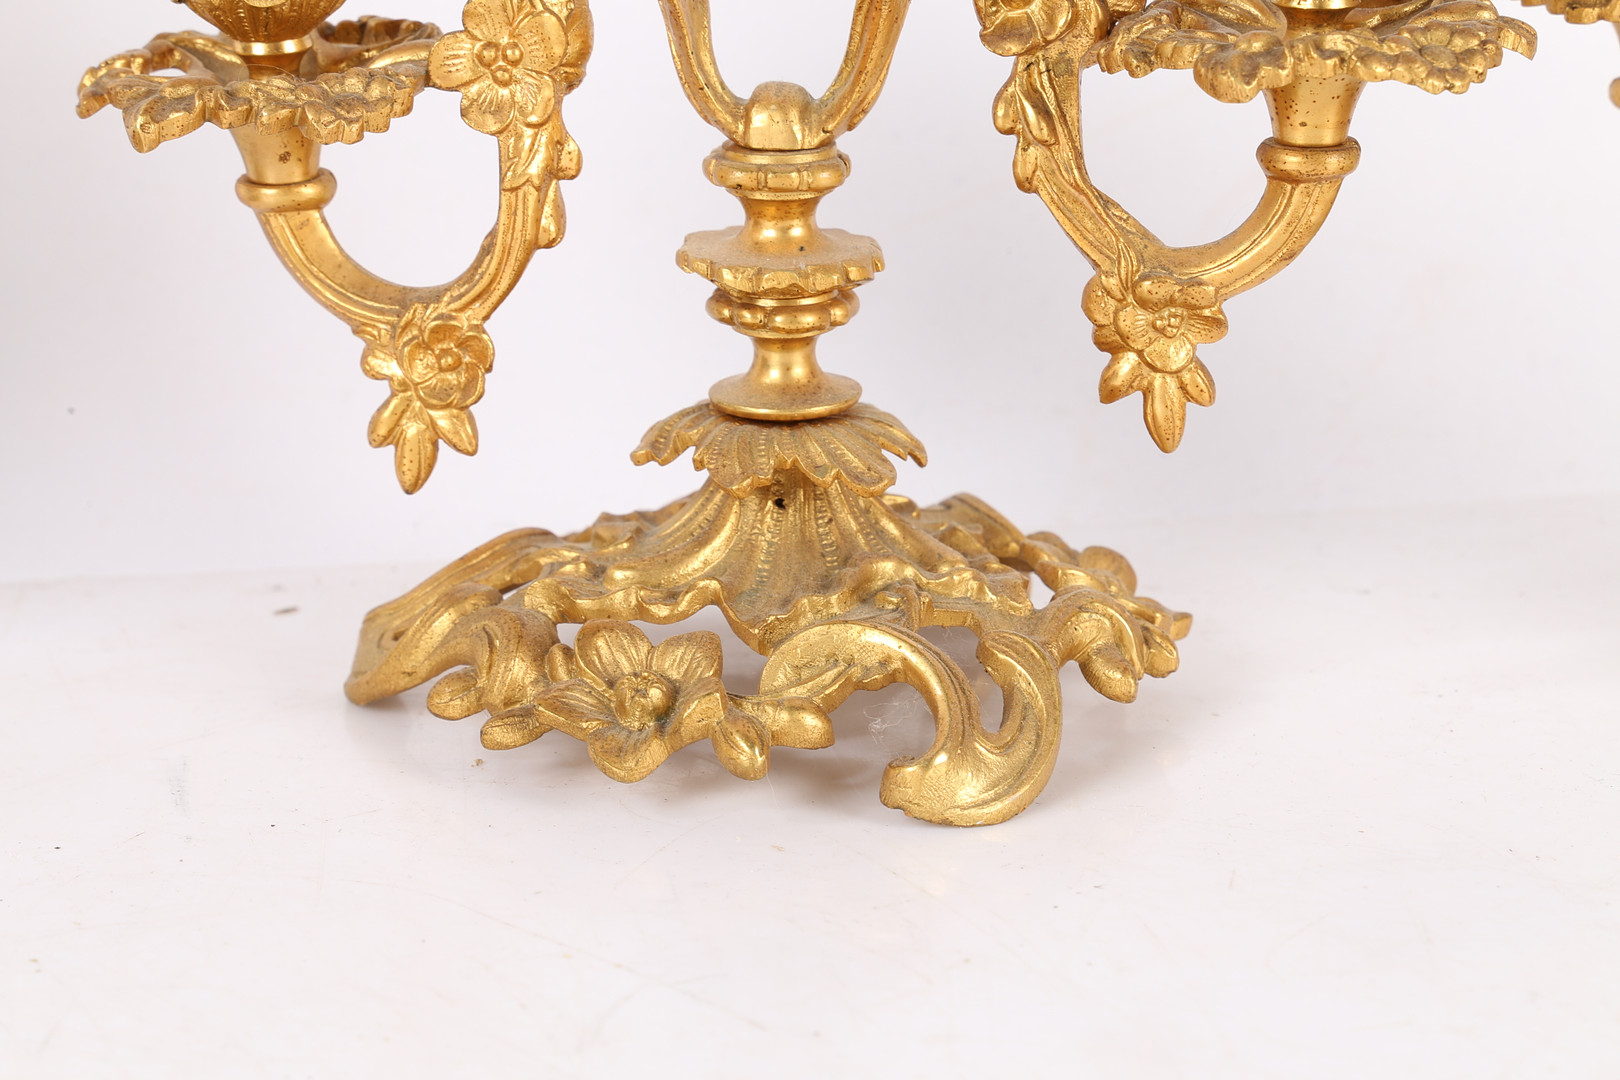 A PAIR OF LATE 19TH CENTURY FRENCH ORMOLU CANDLESTICKS. - Image 4 of 4